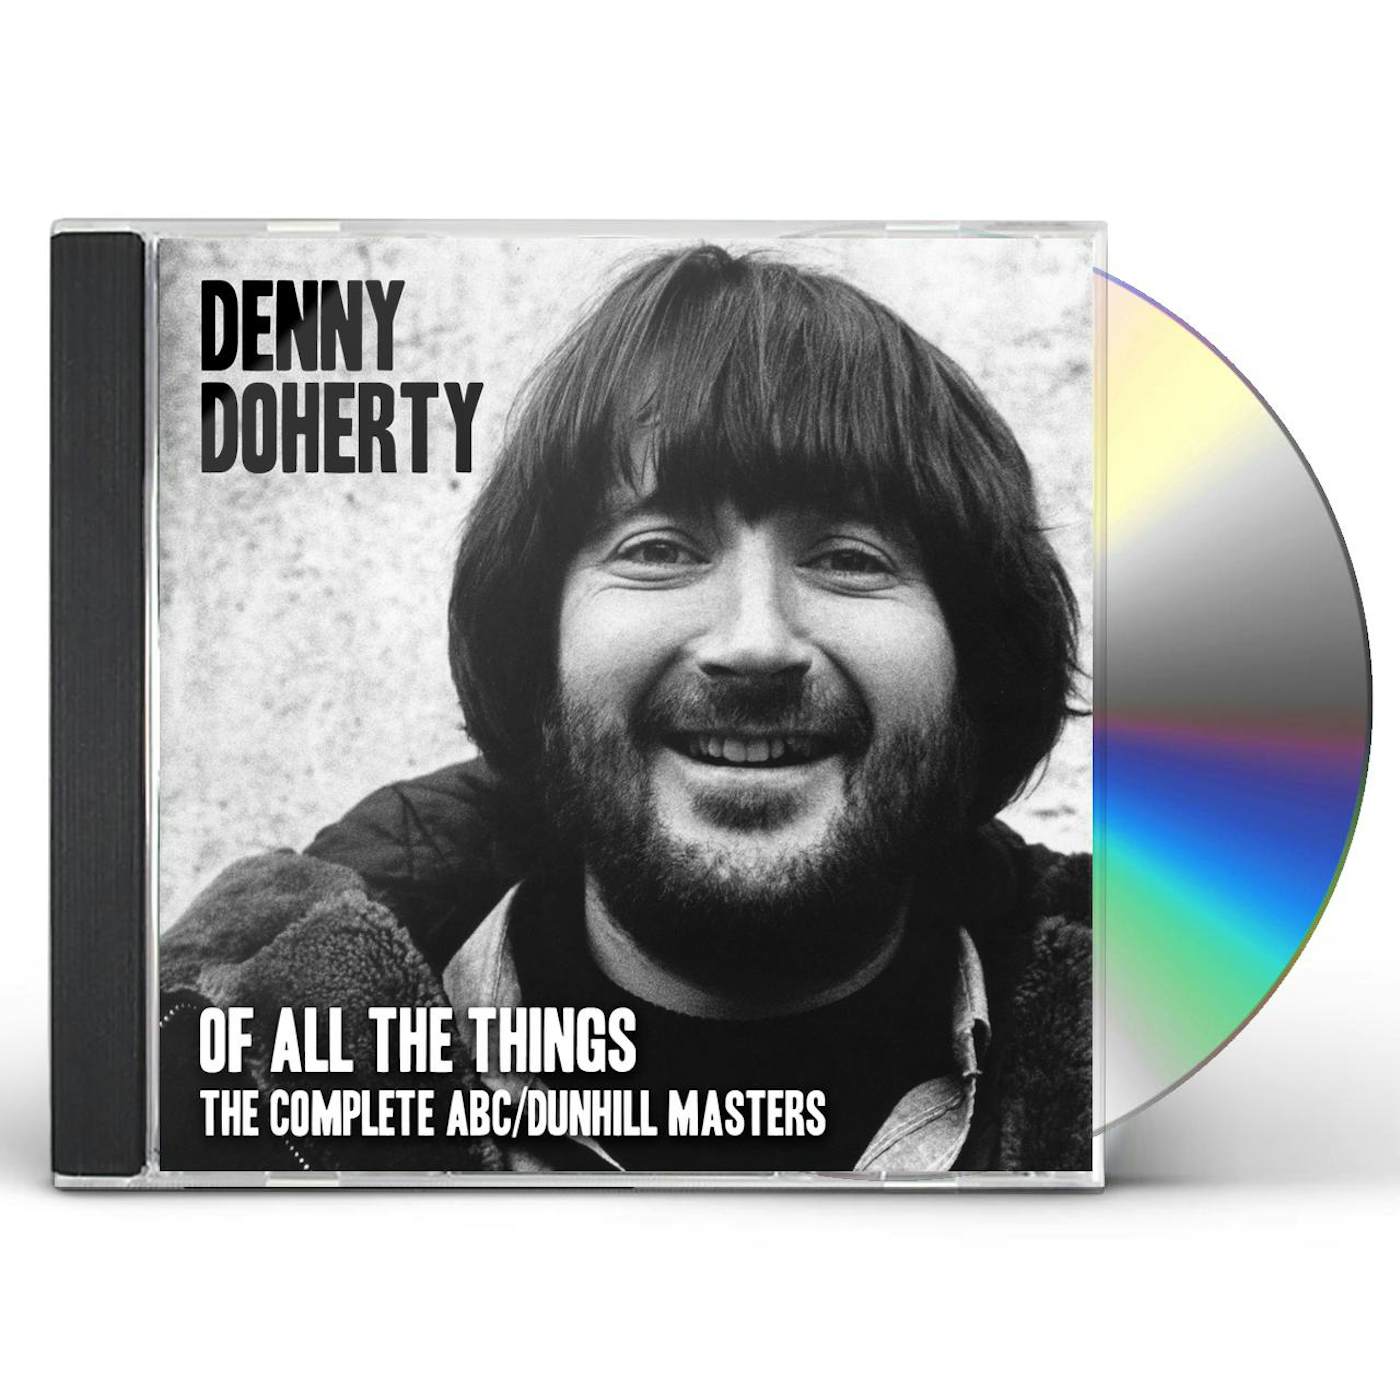 Denny Doherty OF ALL THE THINGS - COMPLETE ABC / DUNHILL MASTERS CD